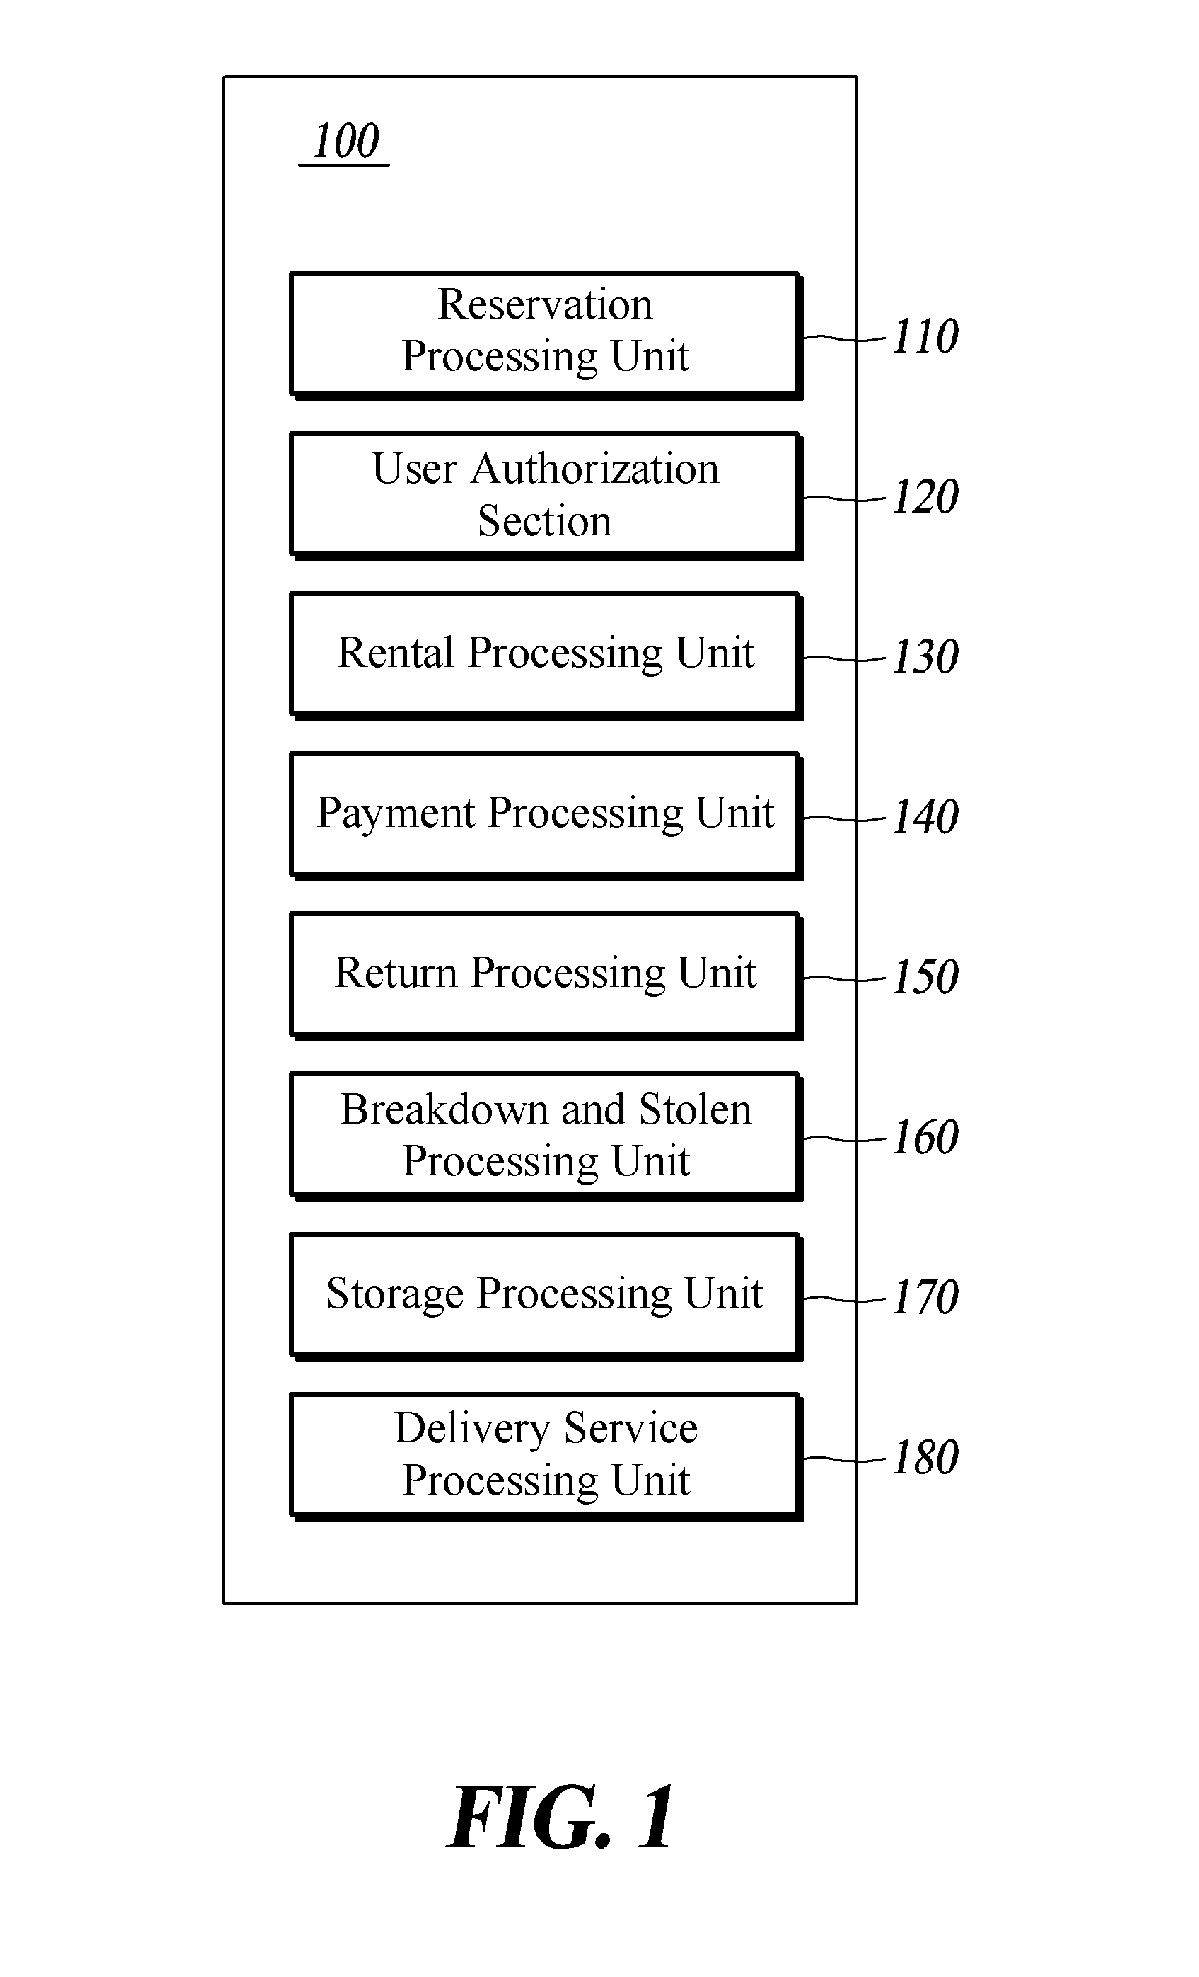 Method and system for providing a public article rental service using a biometric identity card